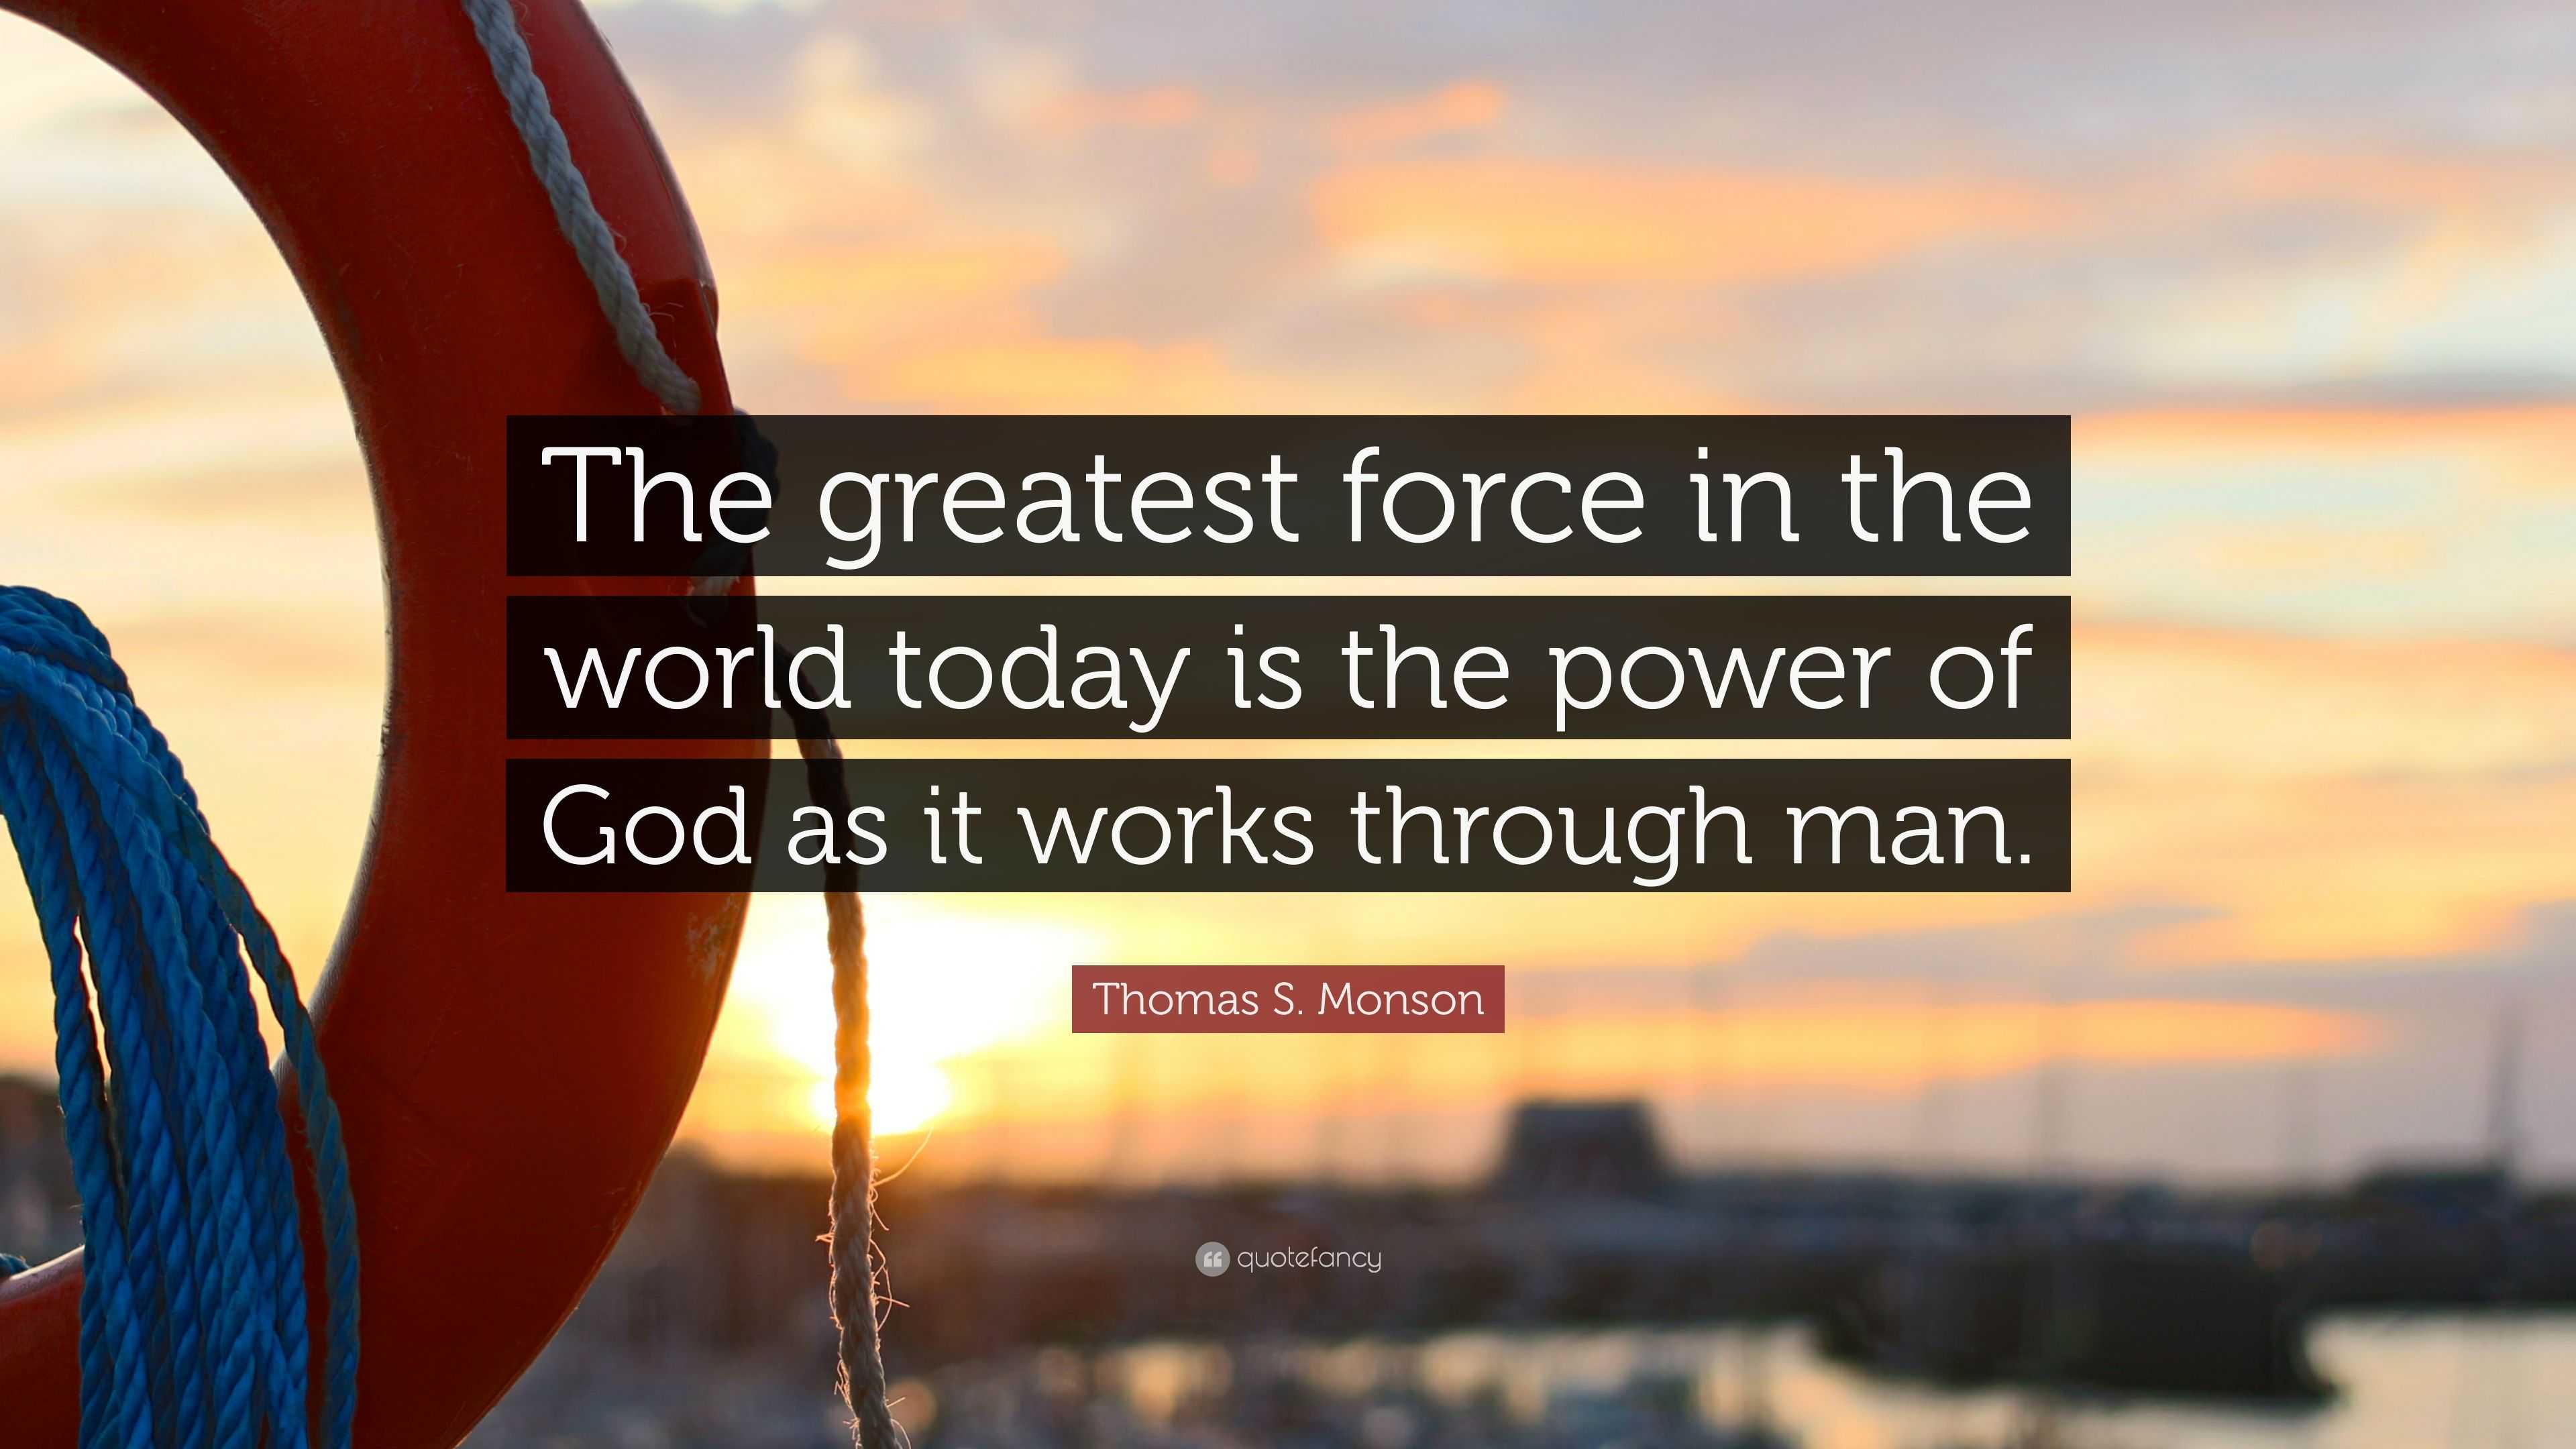 Thomas S. Monson Quote: “The greatest force in the world today is 